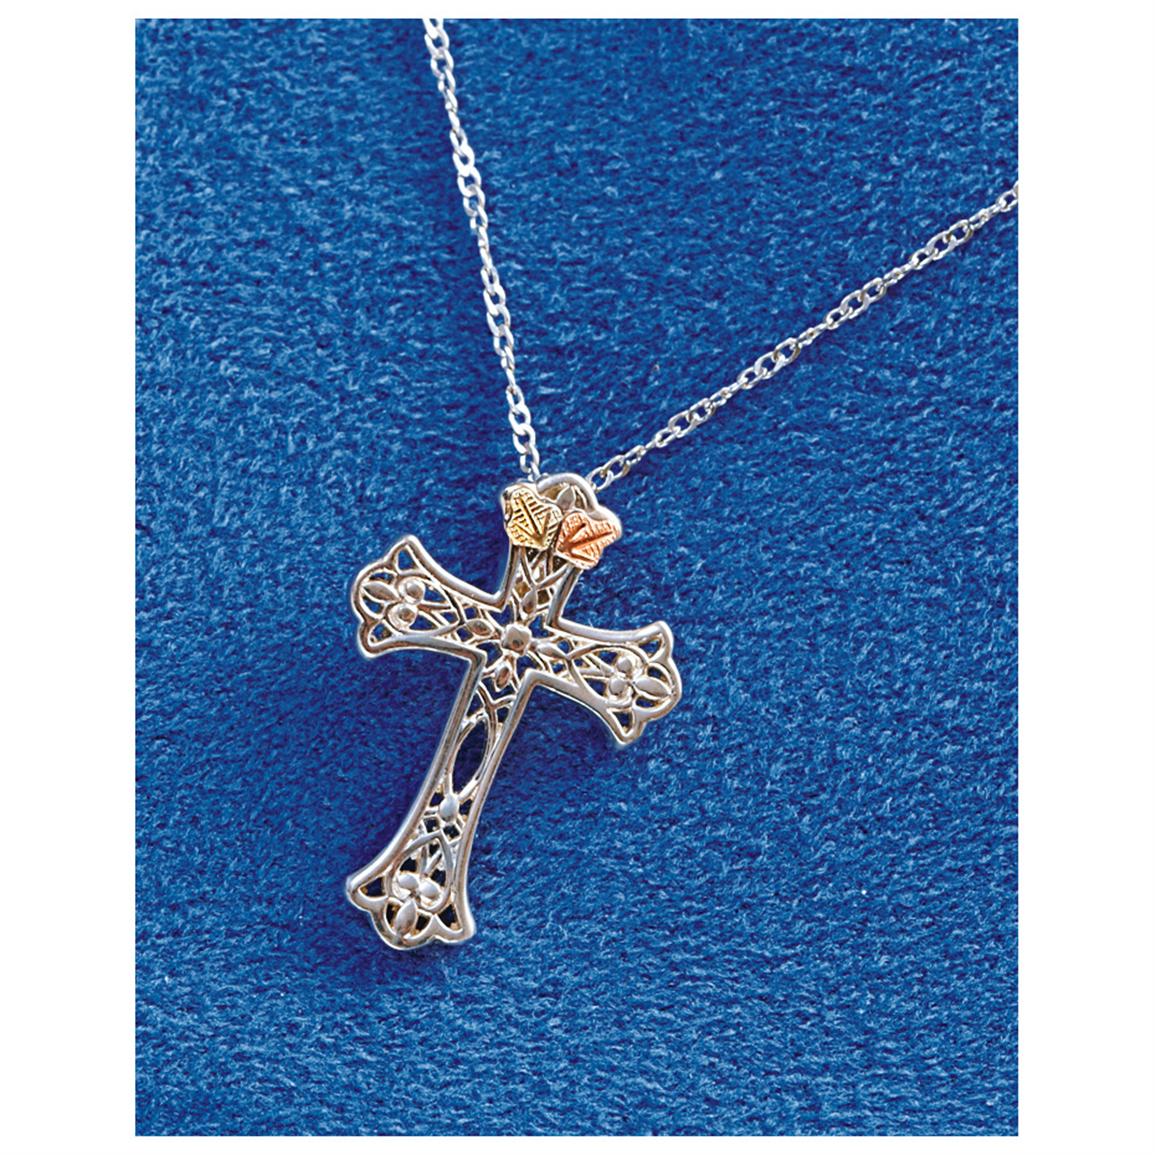 Sterling / Black Hills Gold Celtic Cross Necklace - 421191, Jewelry at